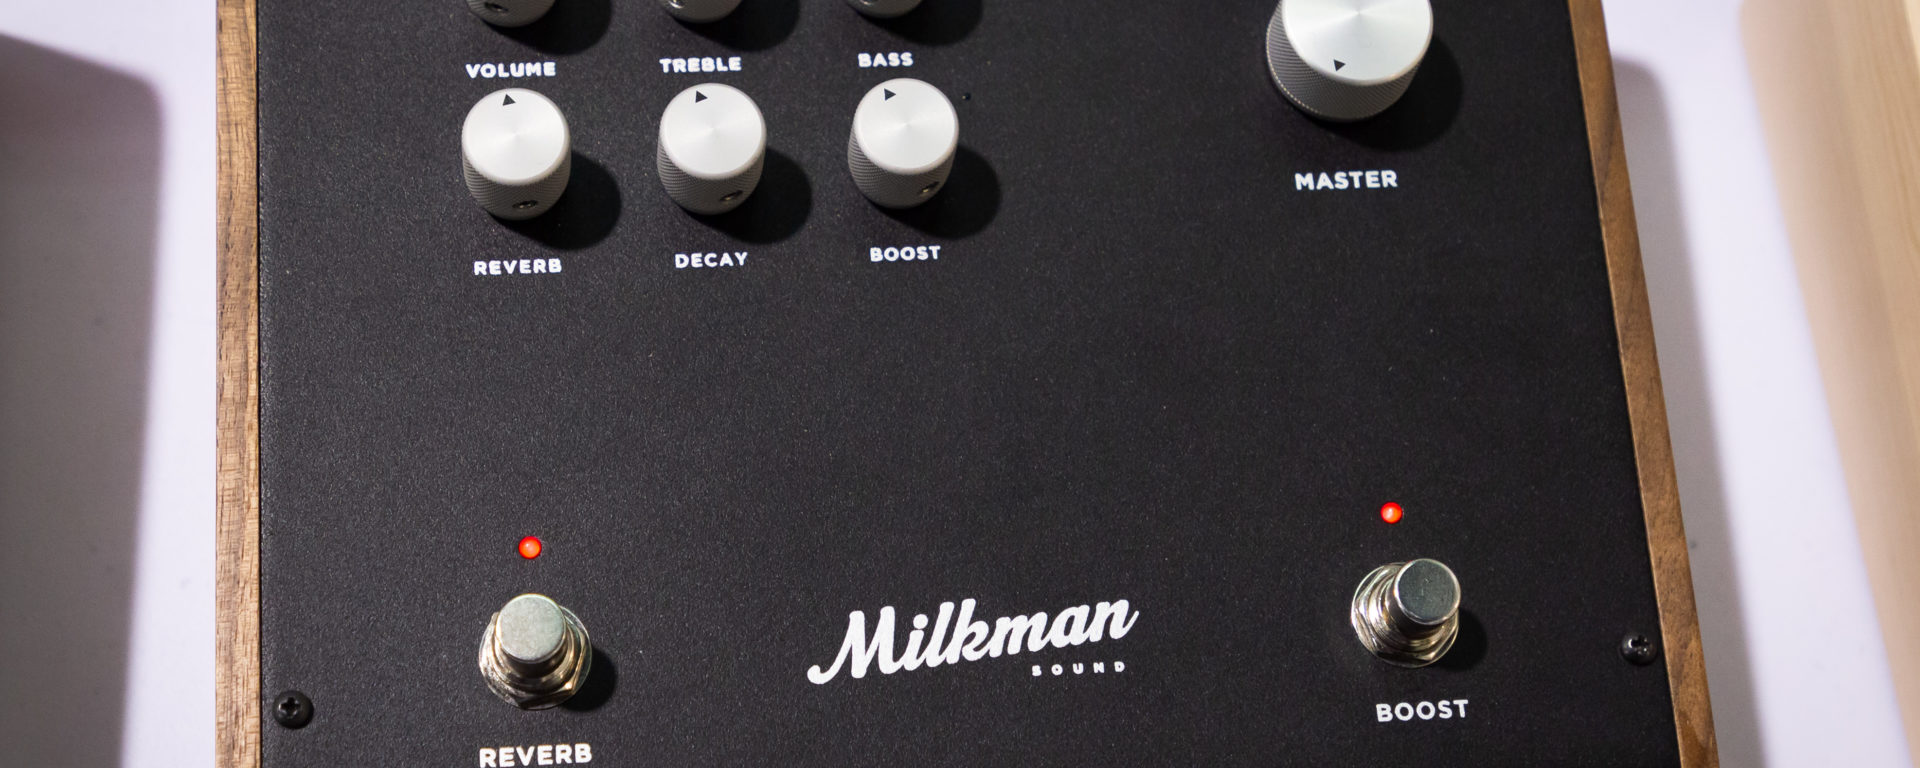 The Amp 100 from Milkman Sound